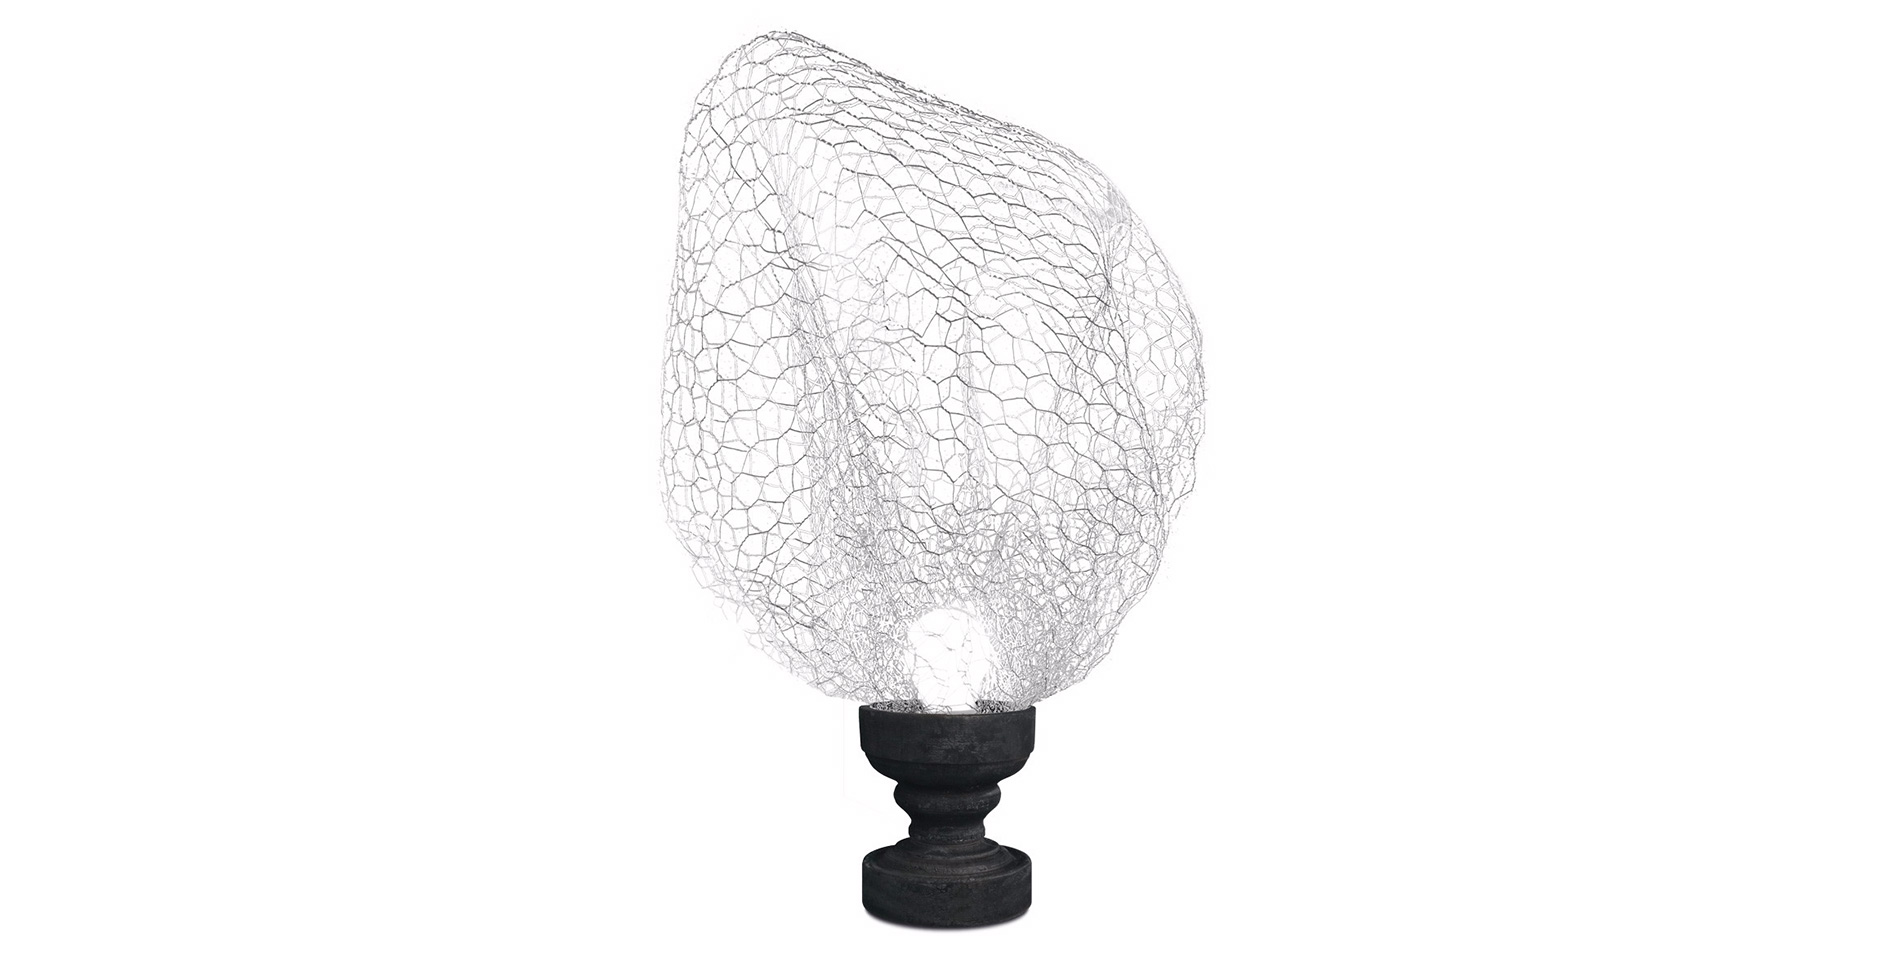 Le Cinque lamp made of wire mesh and wood | Sustainable and handmade lamp design by Antonio Pascale for Eetico Project | Made in Italy